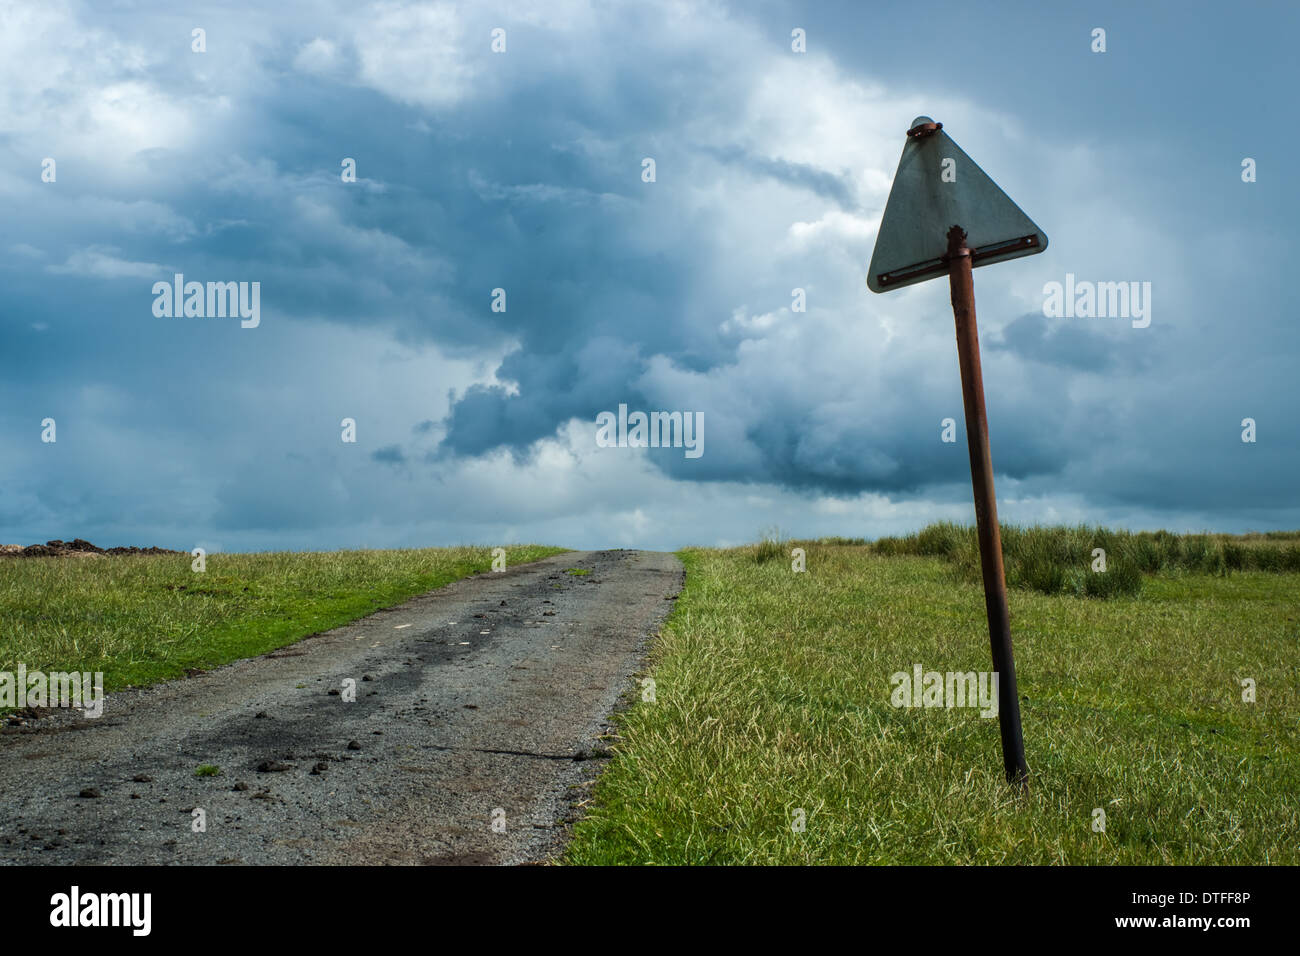 Broken Road Sign By A Country Lane Under A Stormy Sky Stock Photo